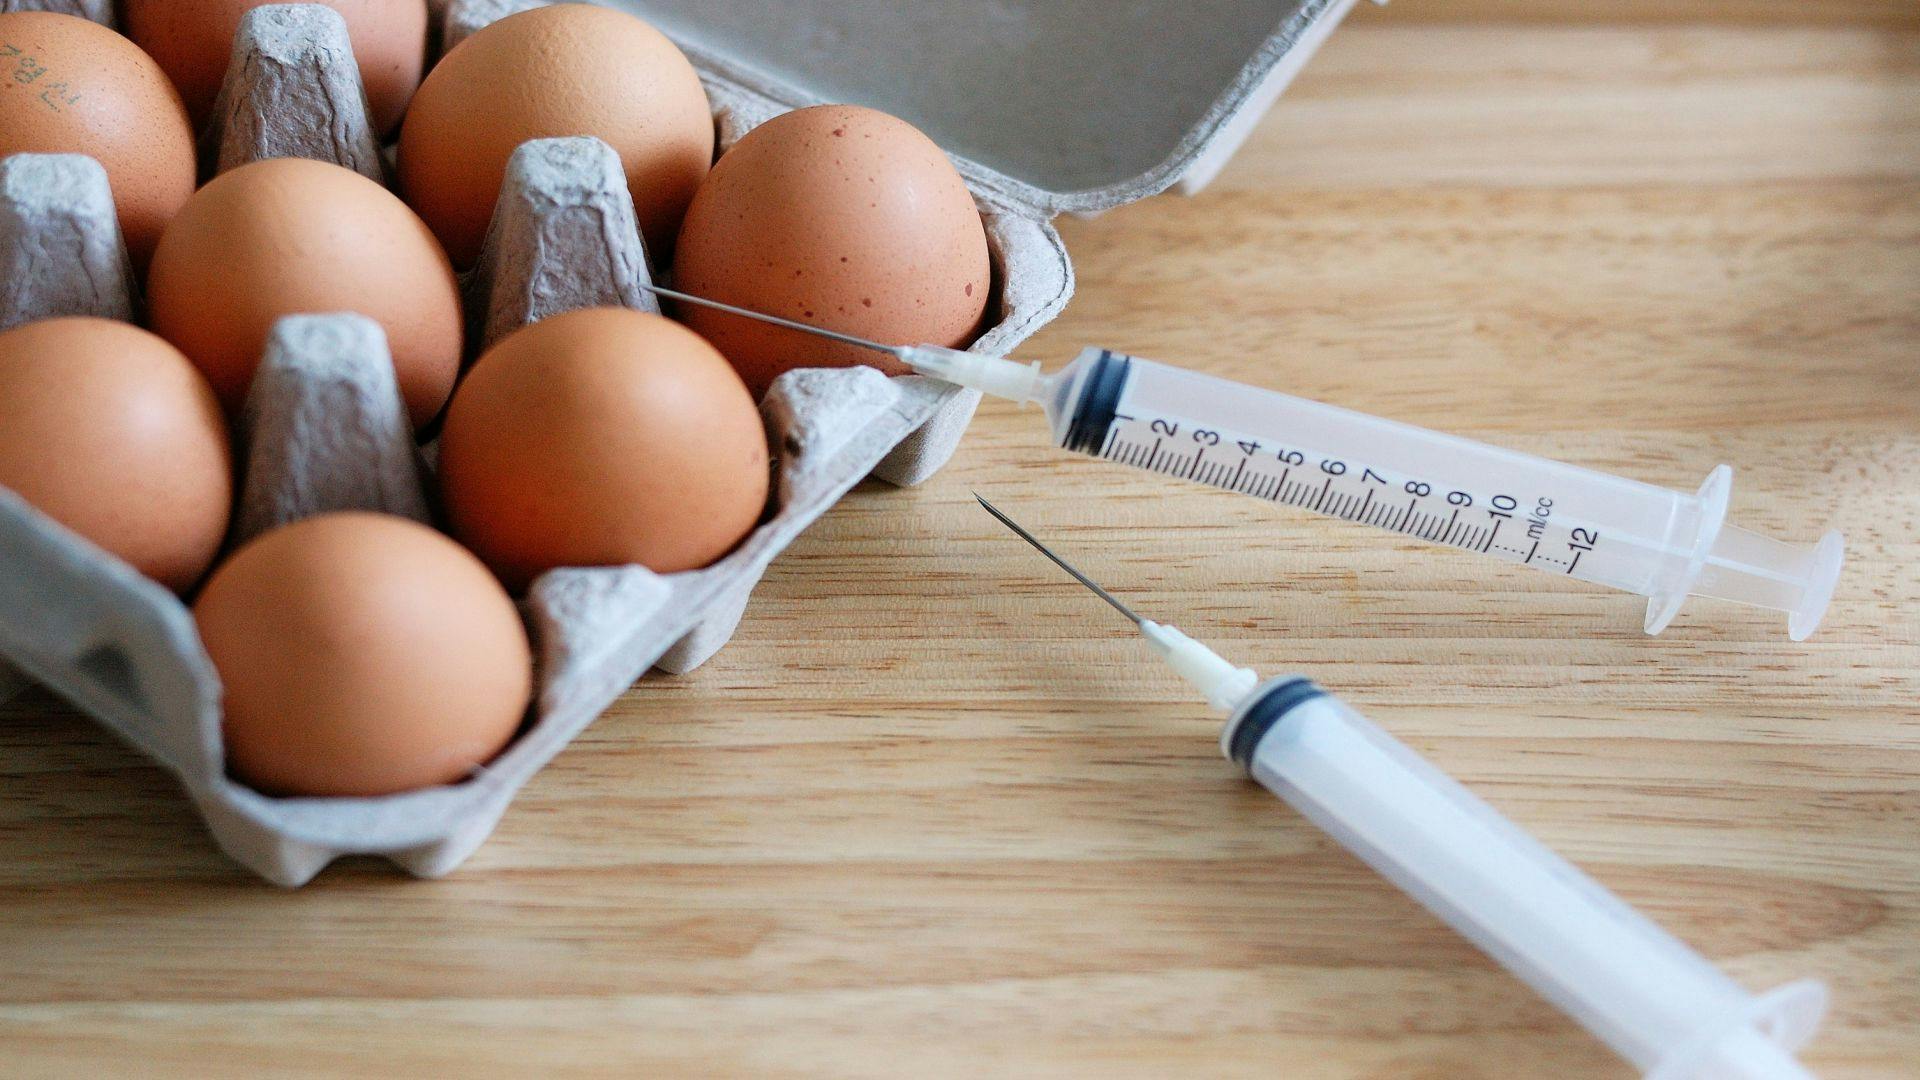 Guidelines Say No Special Precautions Needed for Flu Shots for People Allergic to Eggs